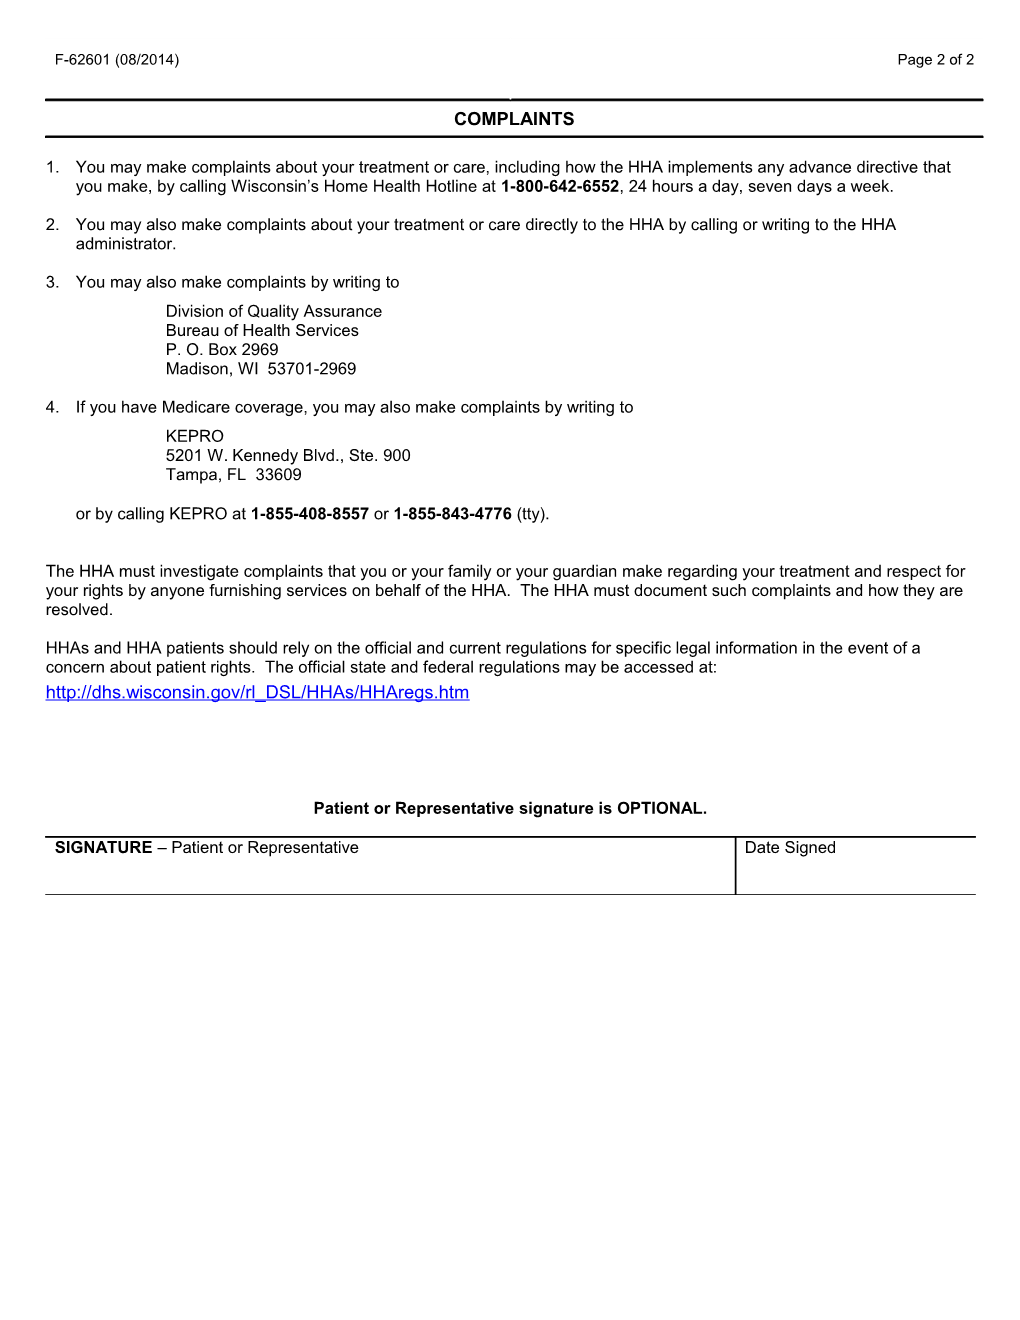 Rights of Home Health Agency Patient, F-62601